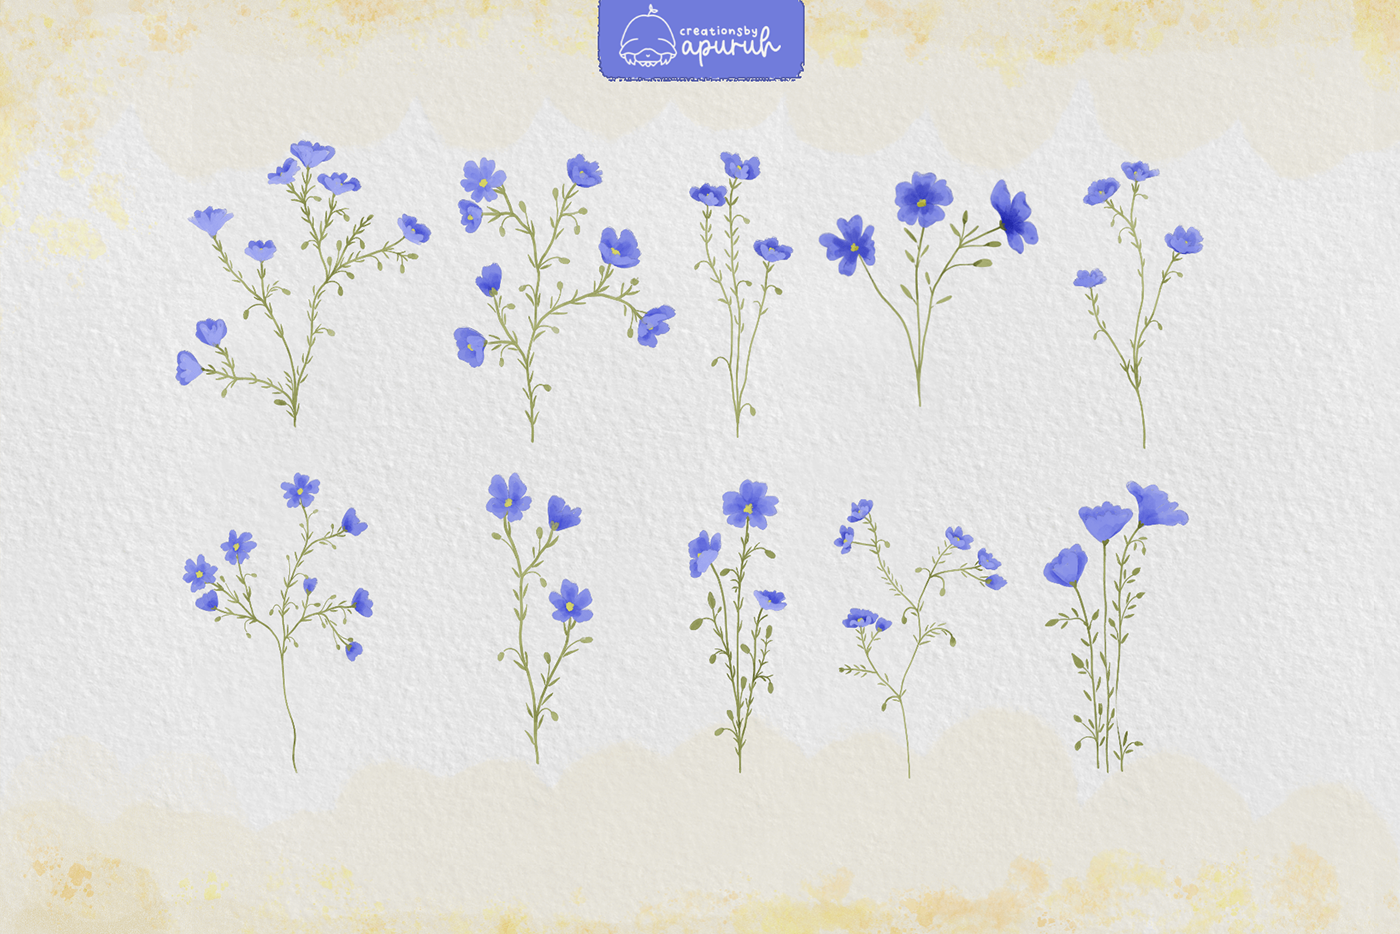 Watercolor clipart Flowers Blue Flax blue flax flower flower clipart watercolor flower Watercolor Wildflowers whimsical flower wild floral wildflowers clipart